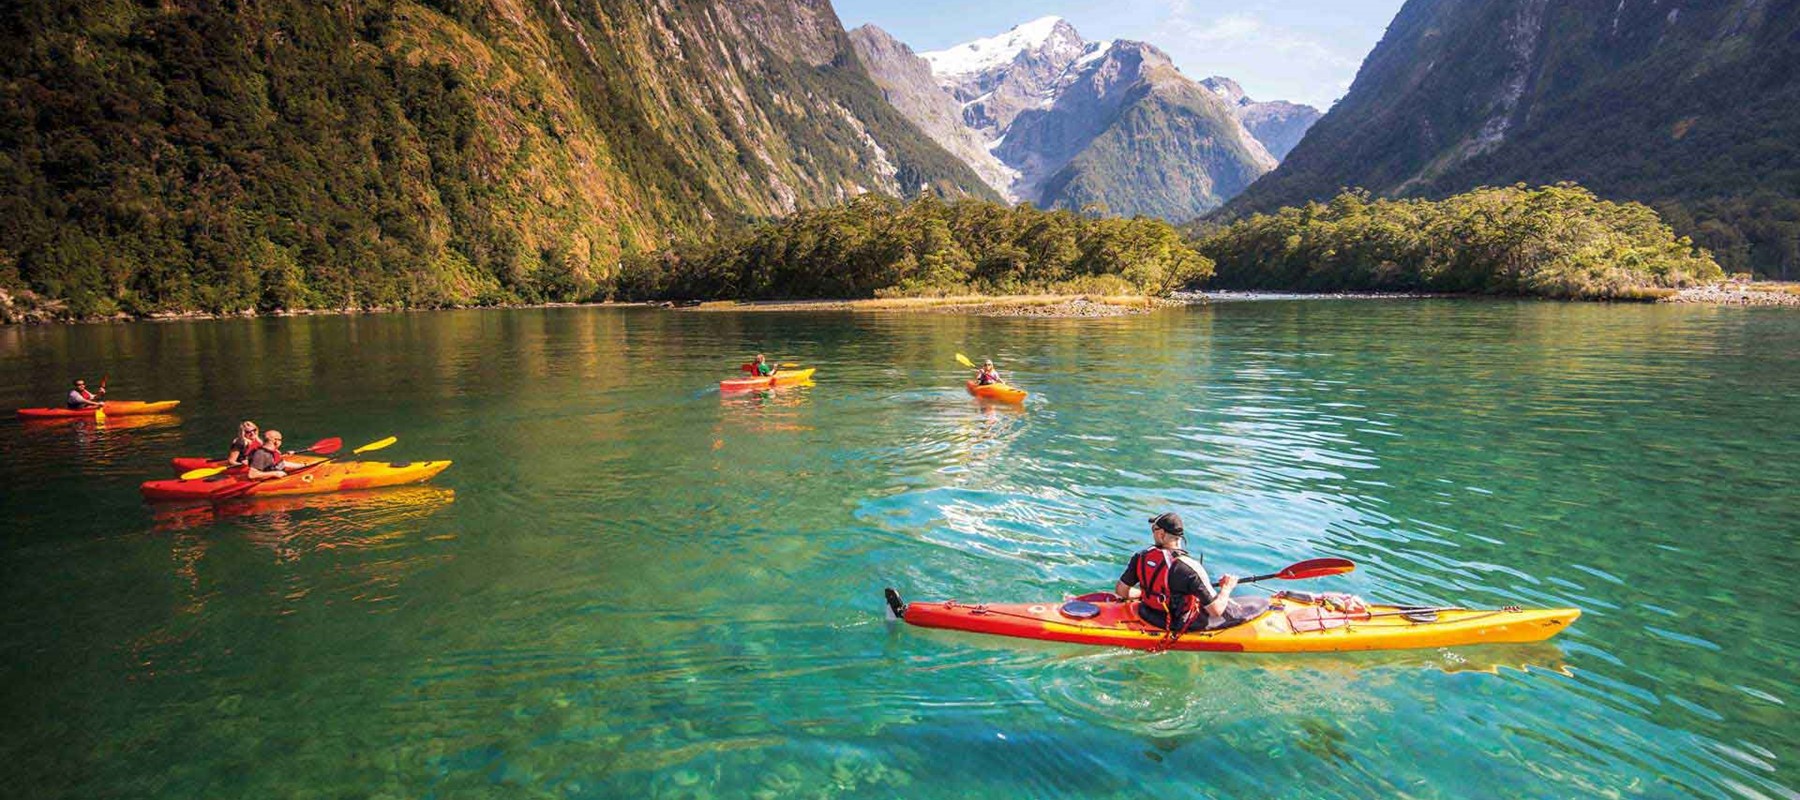 A group Kayaking on Milford Sound's clear blue waters. One of the Milford Sound Lodge's activities.